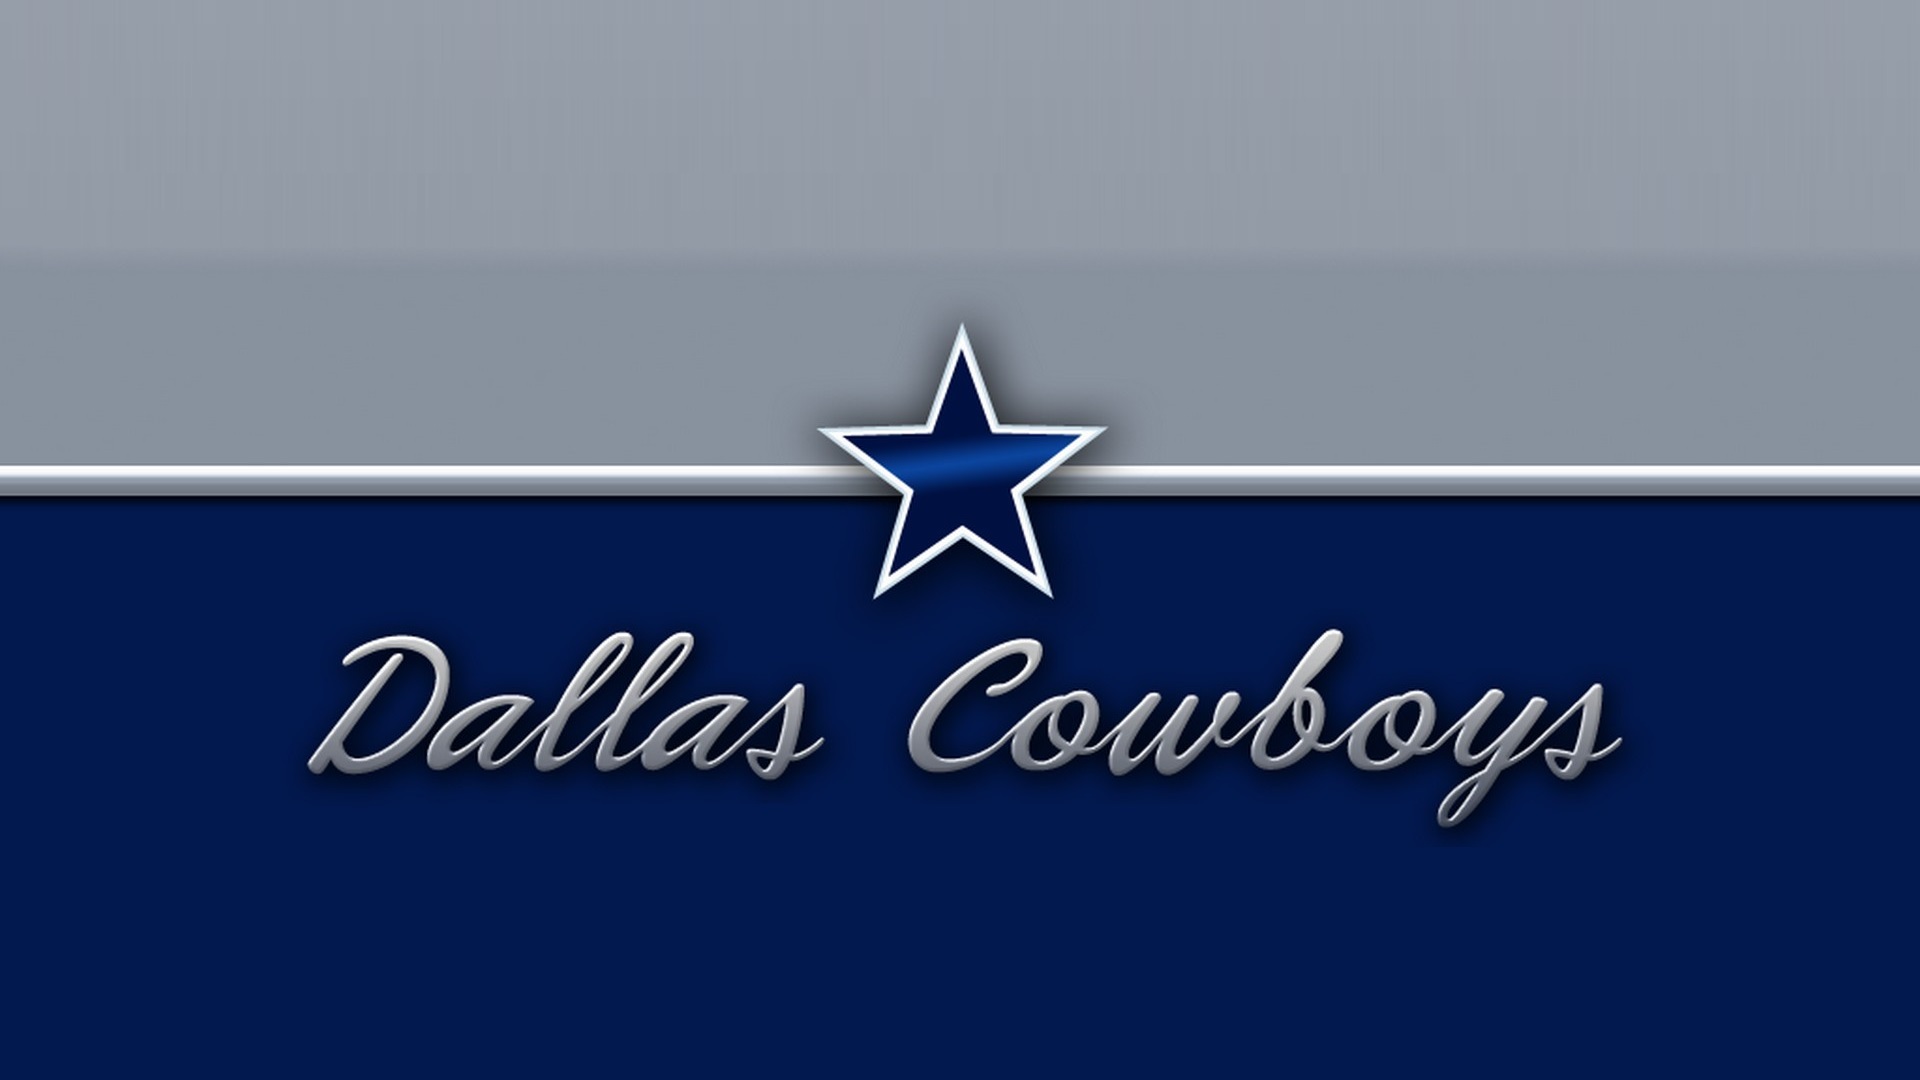 HD Dallas Cowboys Backgrounds with high-resolution 1920x1080 pixel. Download and set as wallpaper for Desktop Computer, Apple iPhone X, XS Max, XR, 8, 7, 6, SE, iPad, Android